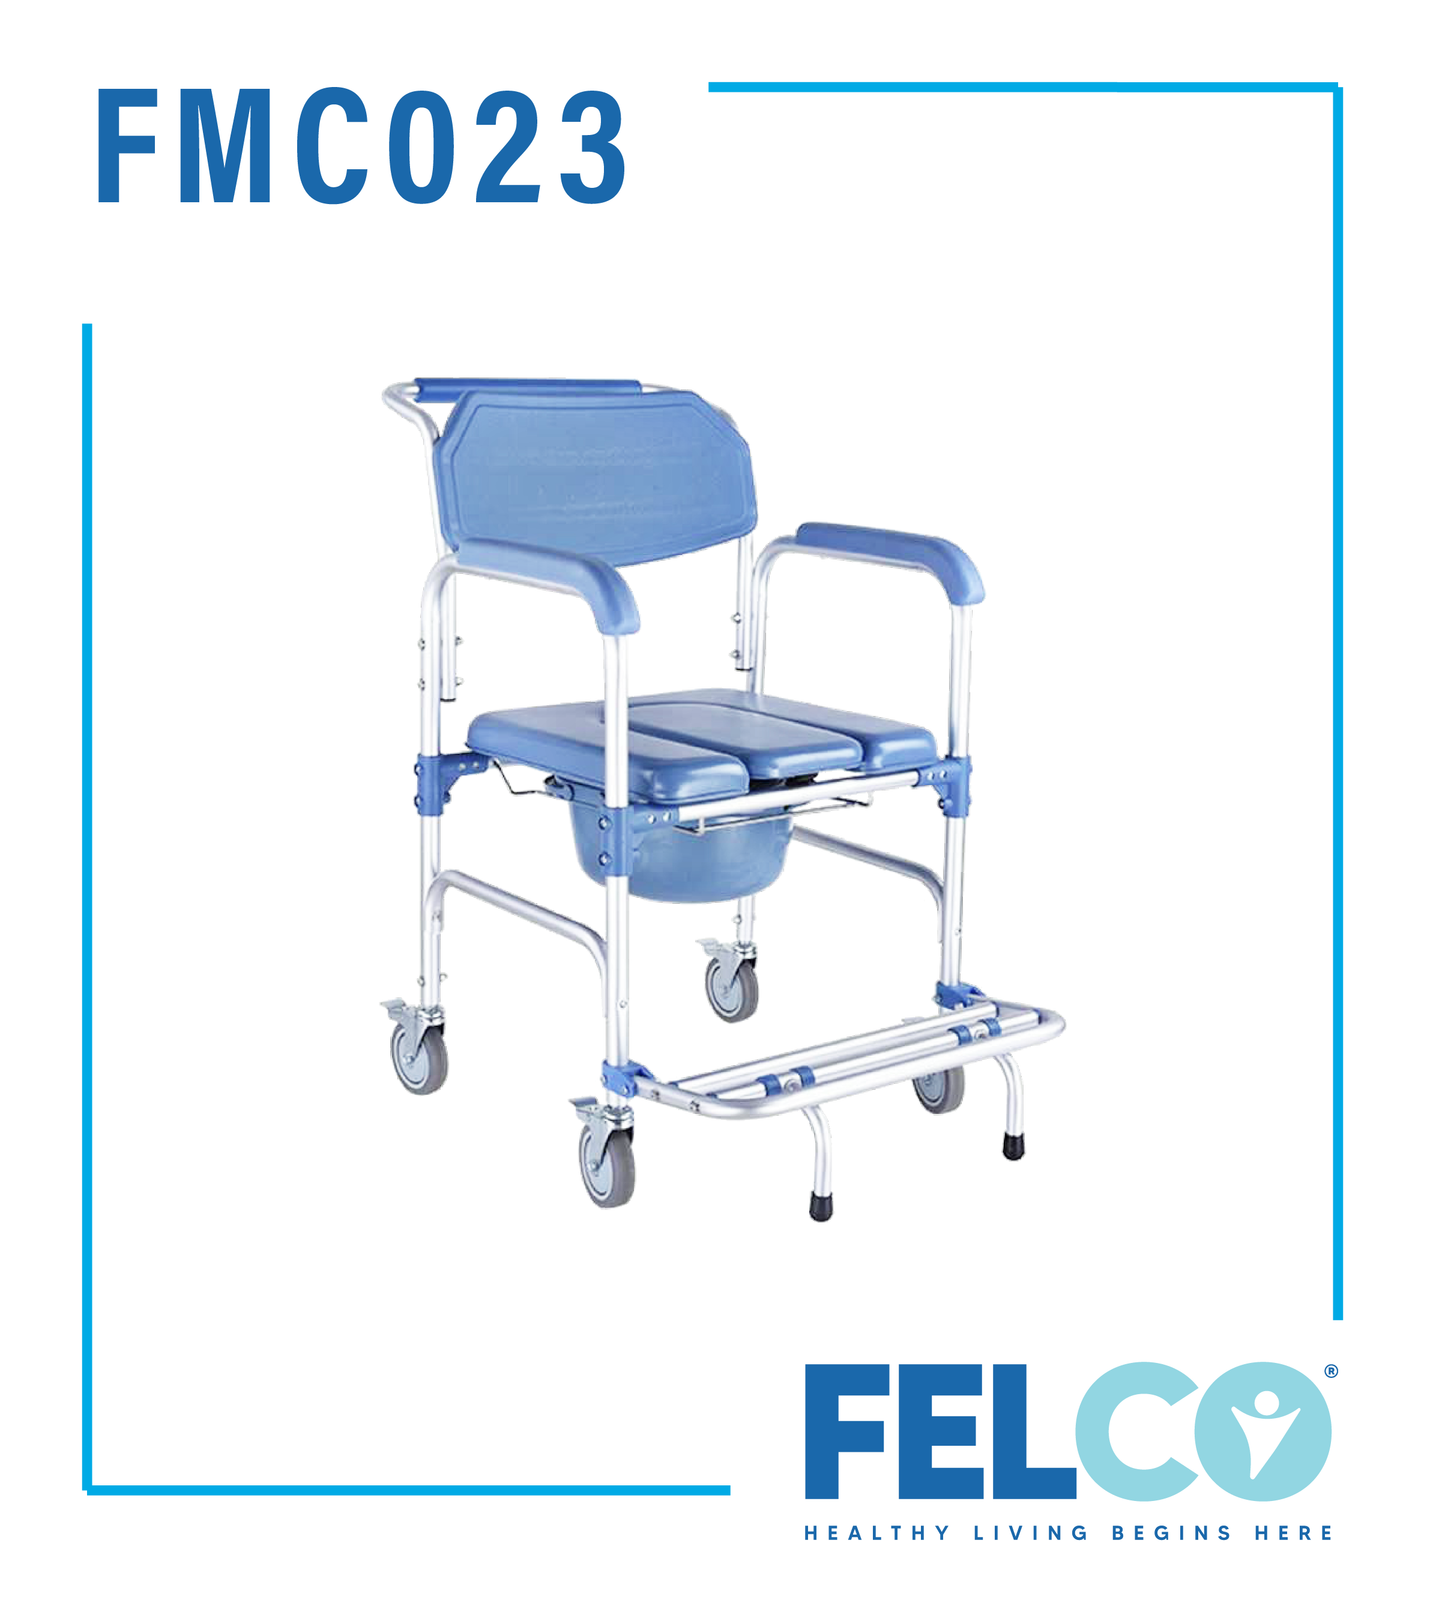 FMC023 3 IN 1 Commode Chair